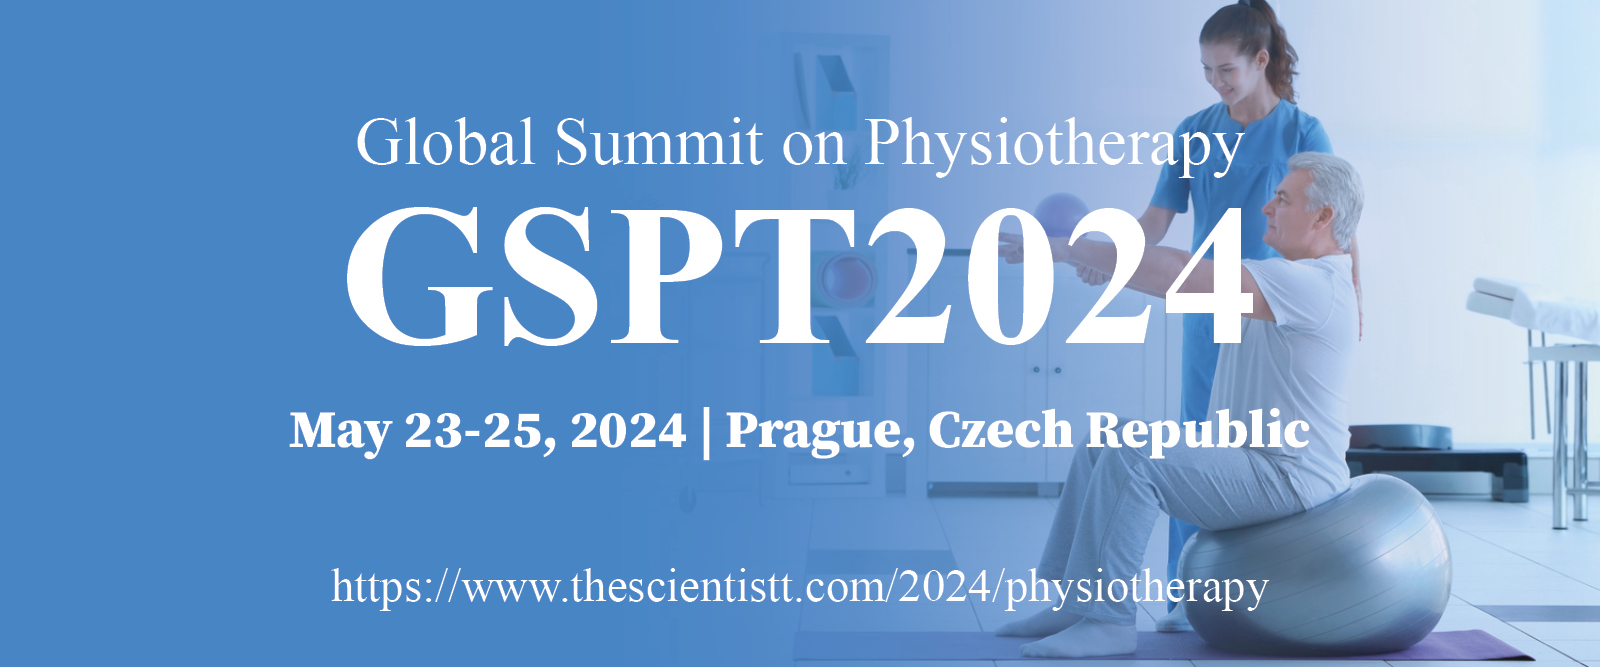 Global Summit on Physiotherapy (GSPT2024), Prague, Czech Republic